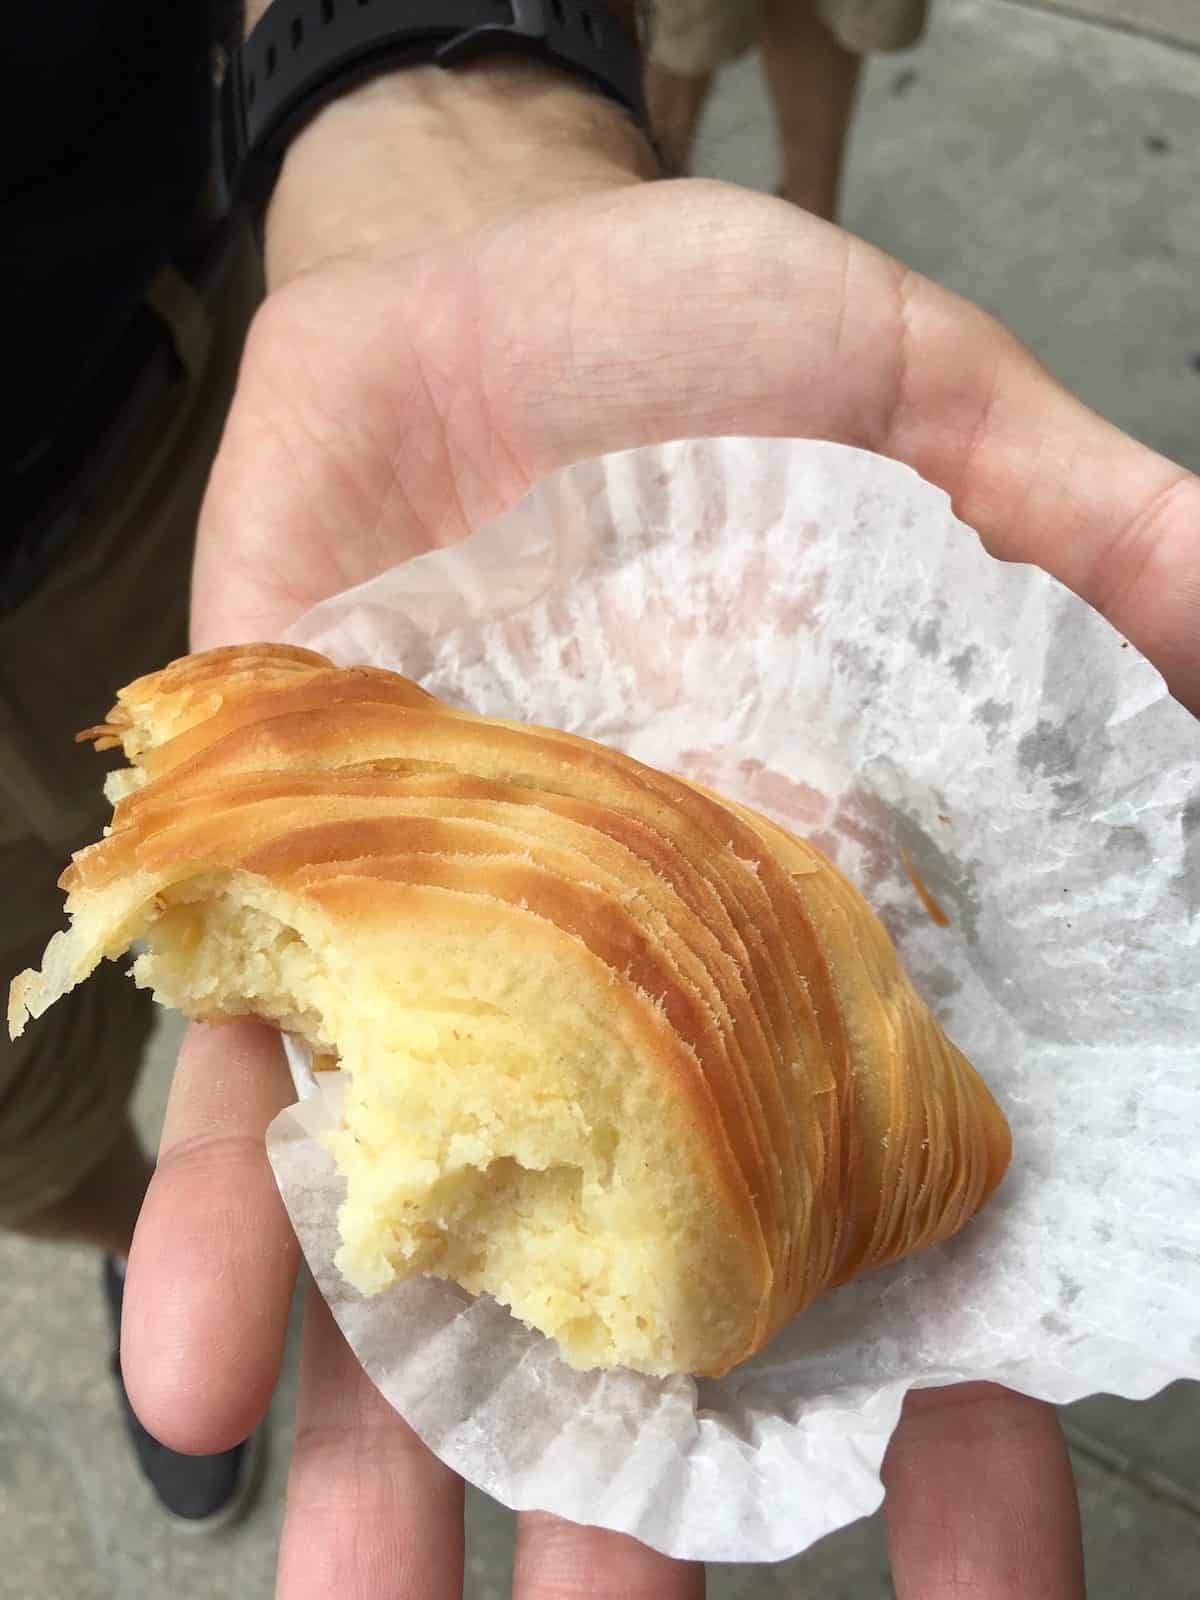 Italian pastry is a must eat on the fun Philly market tour